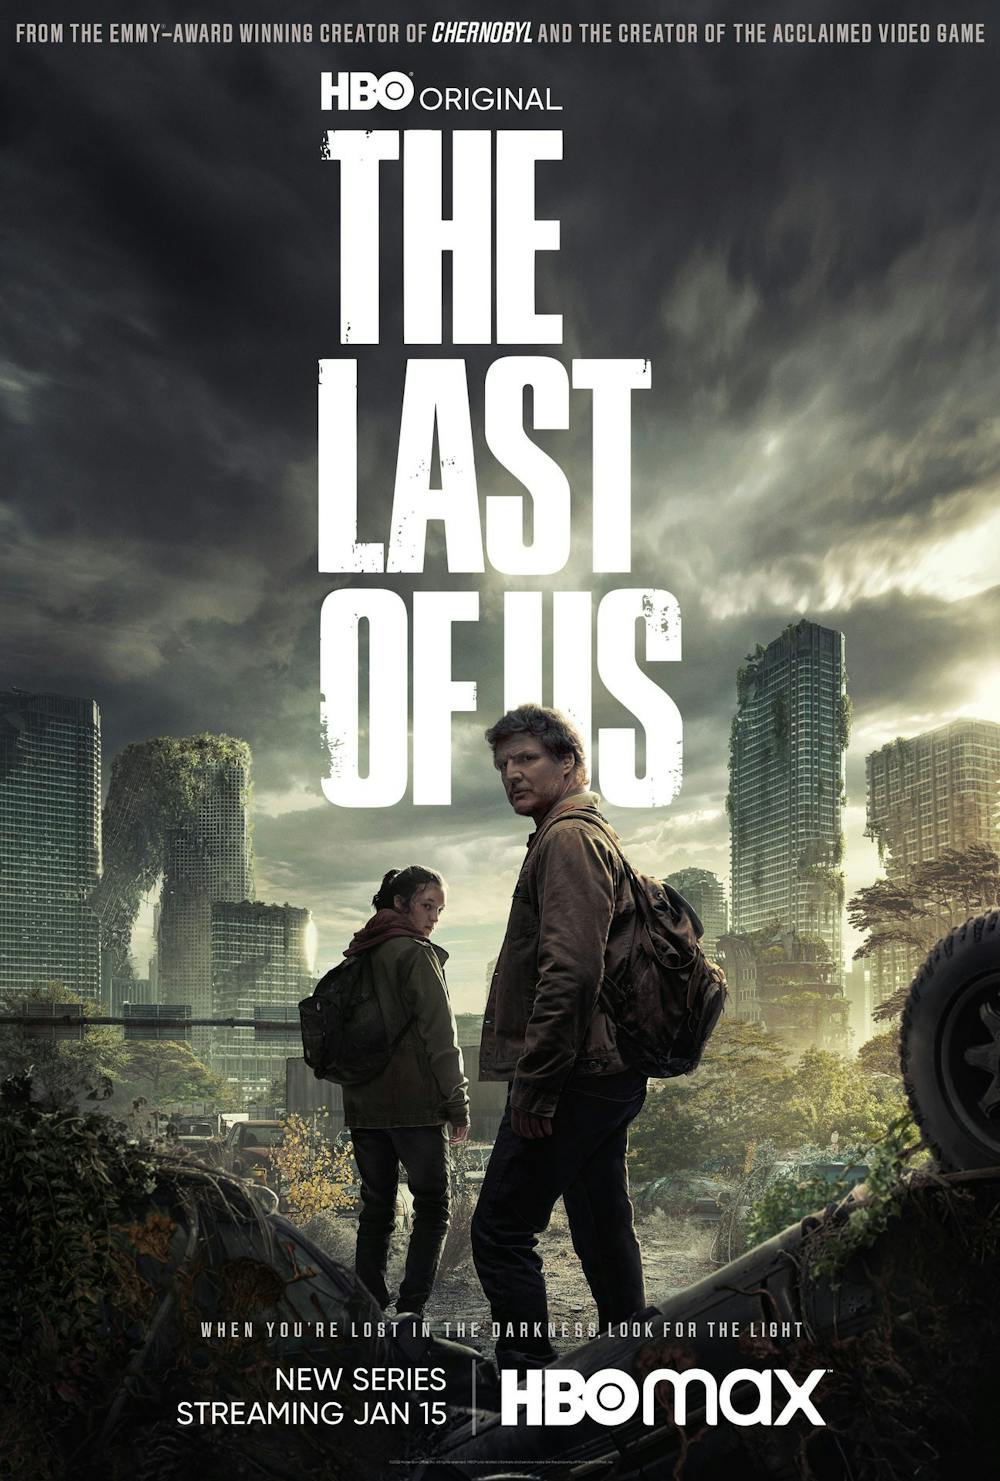 Review: The first half of 'The Last of Us' season one is promising